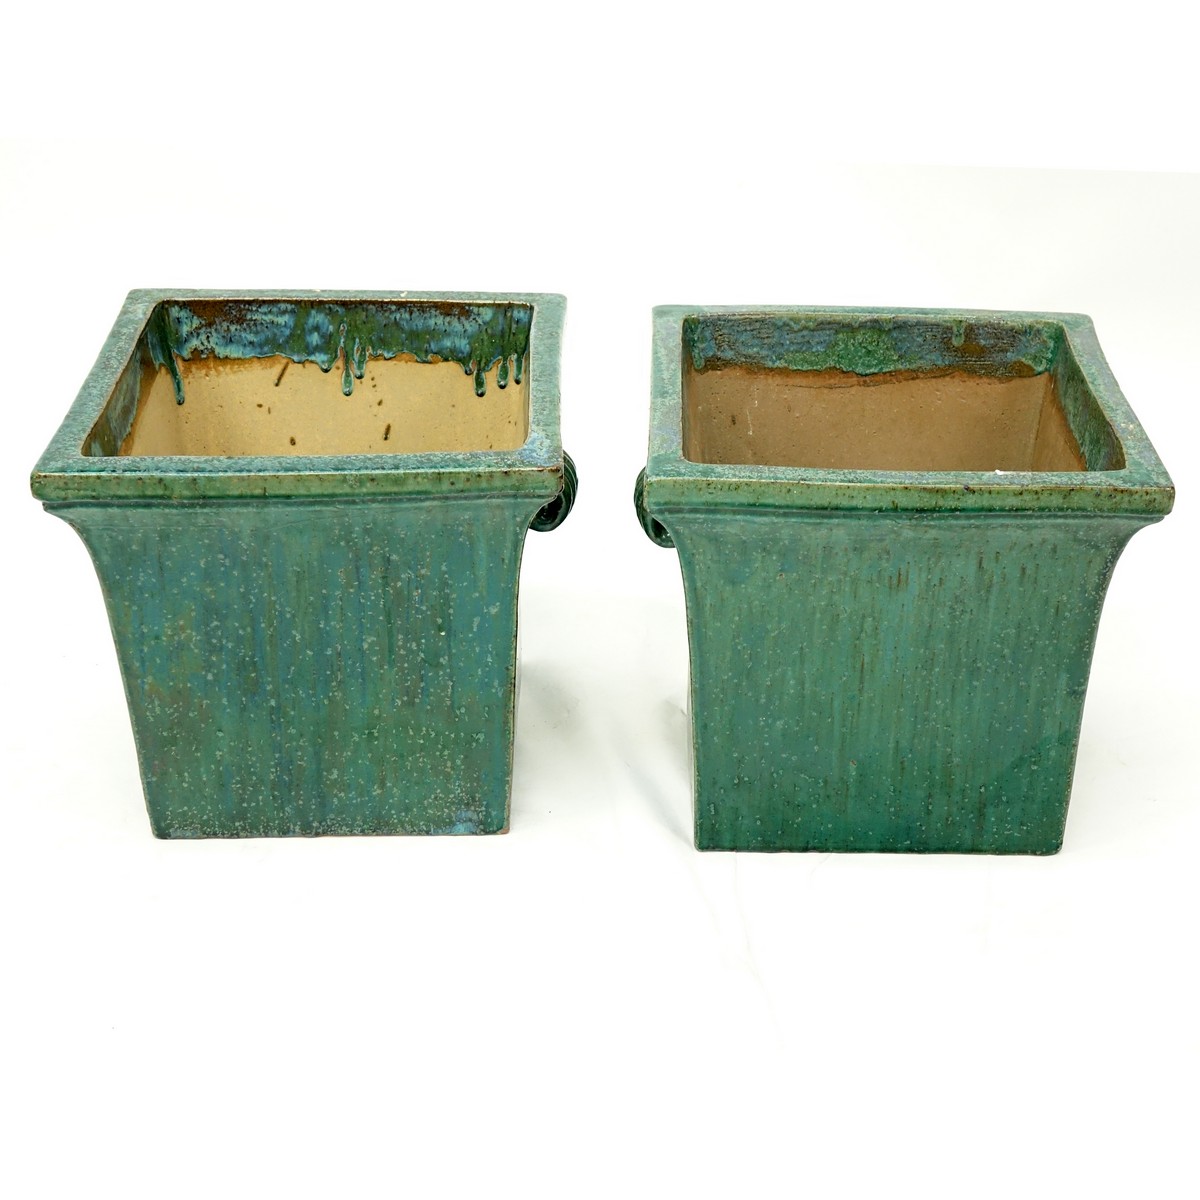 Pair of Large Chinese Style Green Glaze Pottery Jardinières with Mock Handles. Typical rubbing and spotting to glaze.